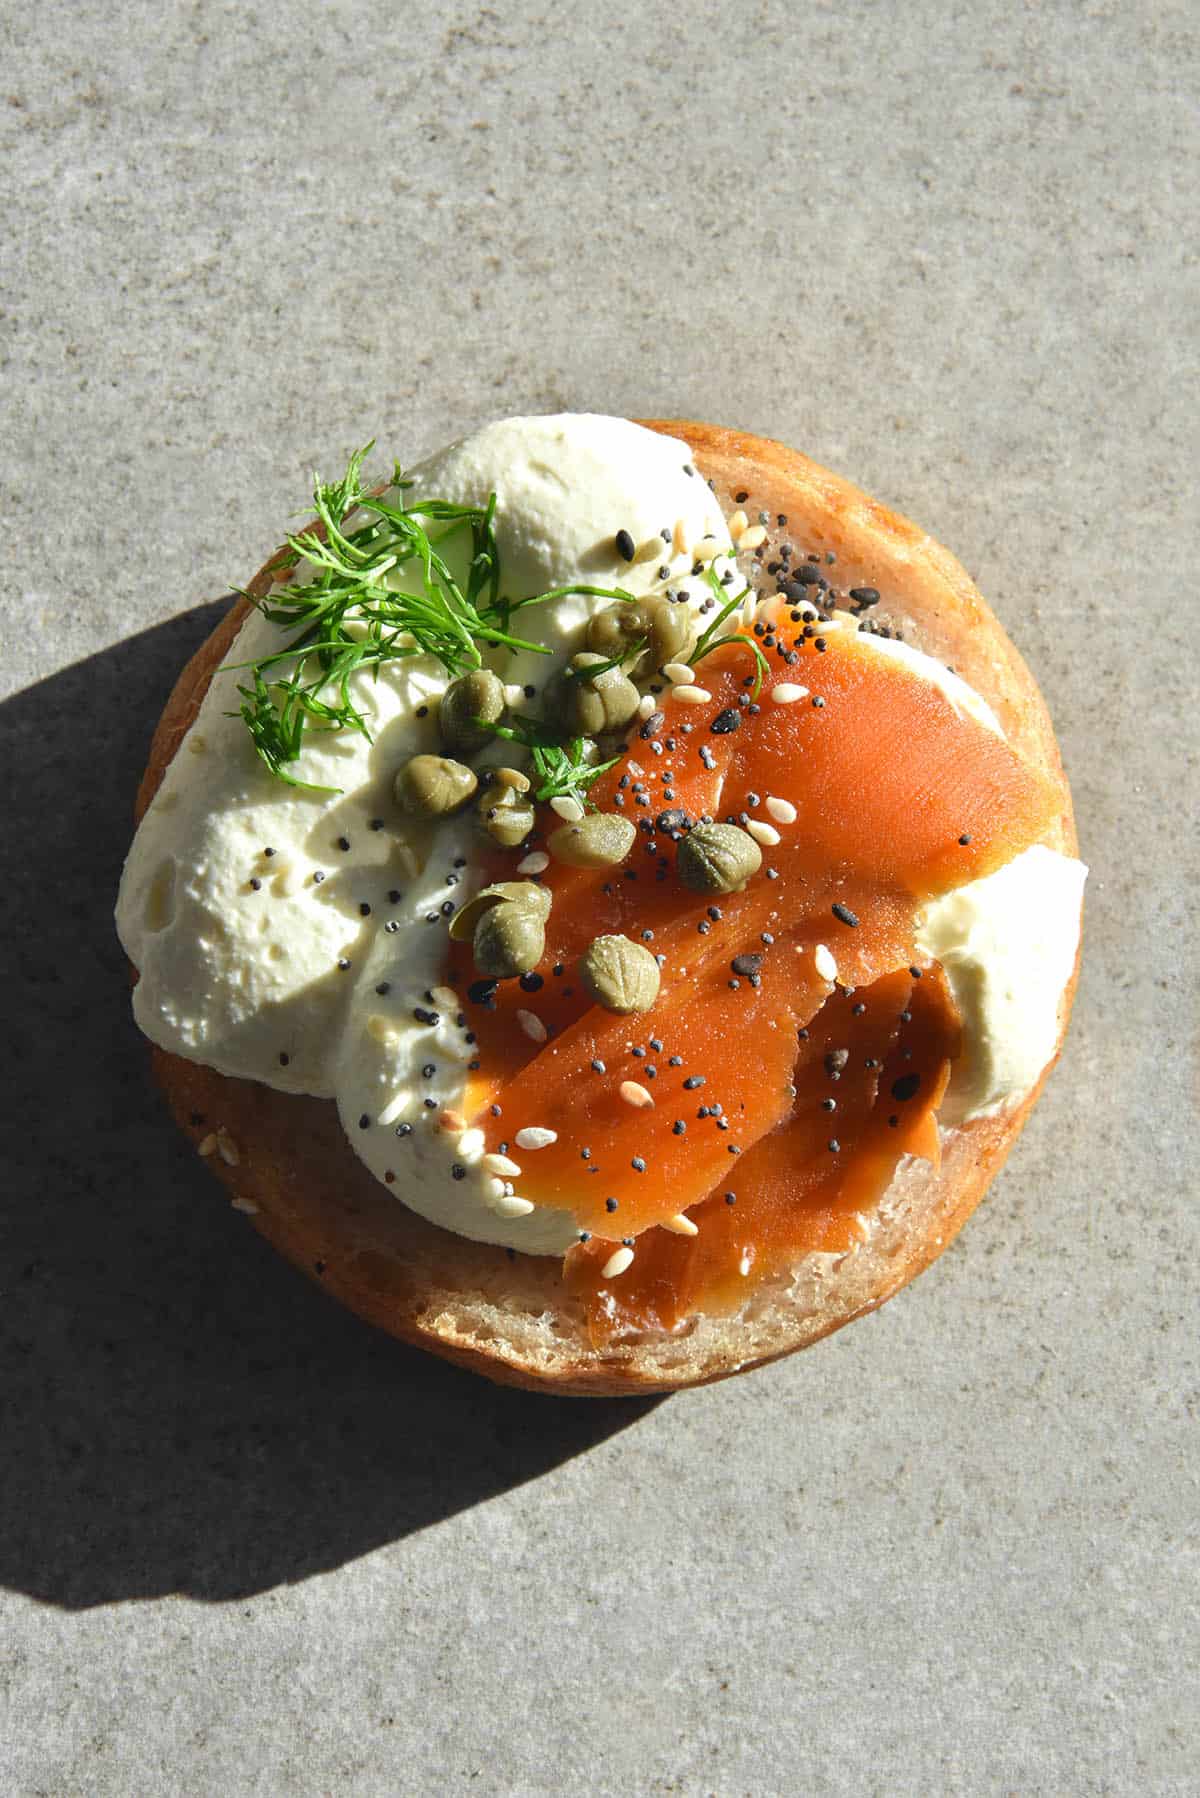 An aerial close up image of a gluten free bagel topped with lactose free mascarpone, carrot lox, capers, dill and a sprinkle of FODMAP friendly everything bagel seasoning. It sits atop a light grey stone backdrop in harsh sunlight, and the bagel's shadow extends to the bottom right of the image